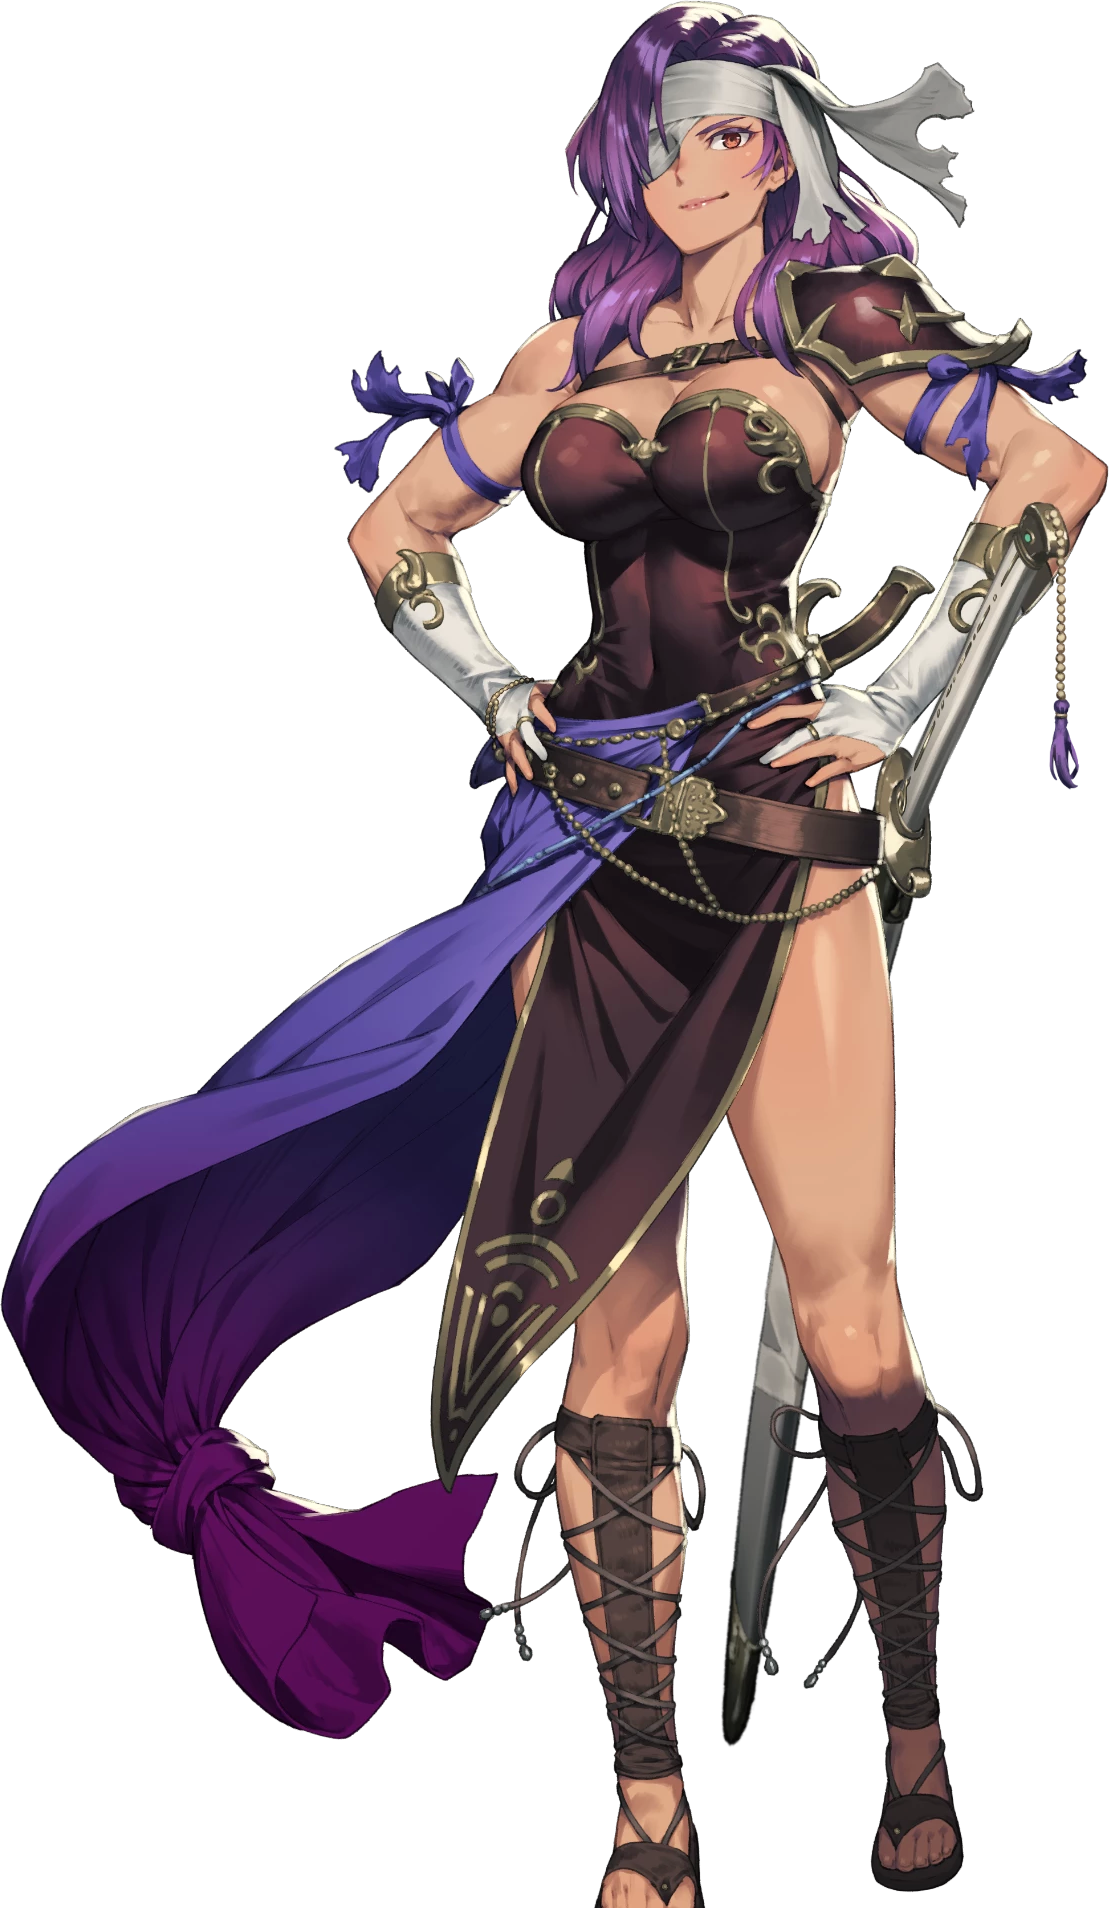 Malice's portrait from Heroes. A proud-looking woman with purple hair, a bandana, and bandages covering one eye. Her outfit covers from her chest to her knees. She has a sword at her side.